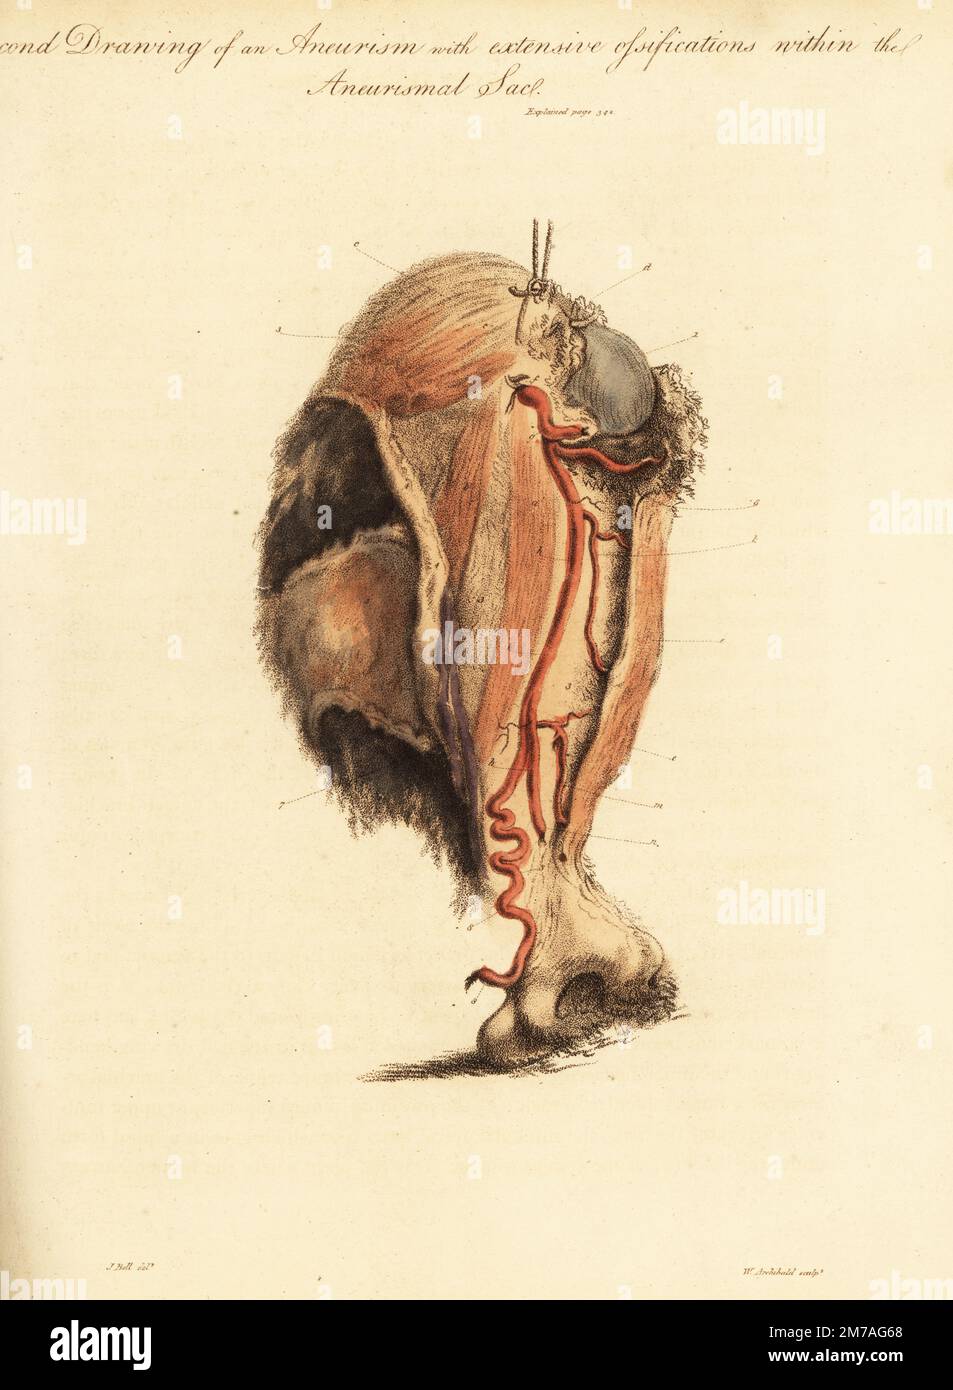 Aneurysmal tumor from the broken arm of a woman knocked down by a horse and cart, 1815. Second drawing of aneurism and extensive ossifications with the aneurismal sac. Humerus bone upper 1 and lower 2, sac 3, coraco brachialis a, biceps b, and deltoid c muscles, arteries f-m and basilic vein 7 stretched over the sac. Handcoloured copperplate engraving by William Archibald after an illustration by John Bell from his own Principles of Surgery, as they Relate to Wounds, Ulcers and Fistulas, Longman,  Hurst, Rees, Orme and Brown, London, 1815. Stock Photo